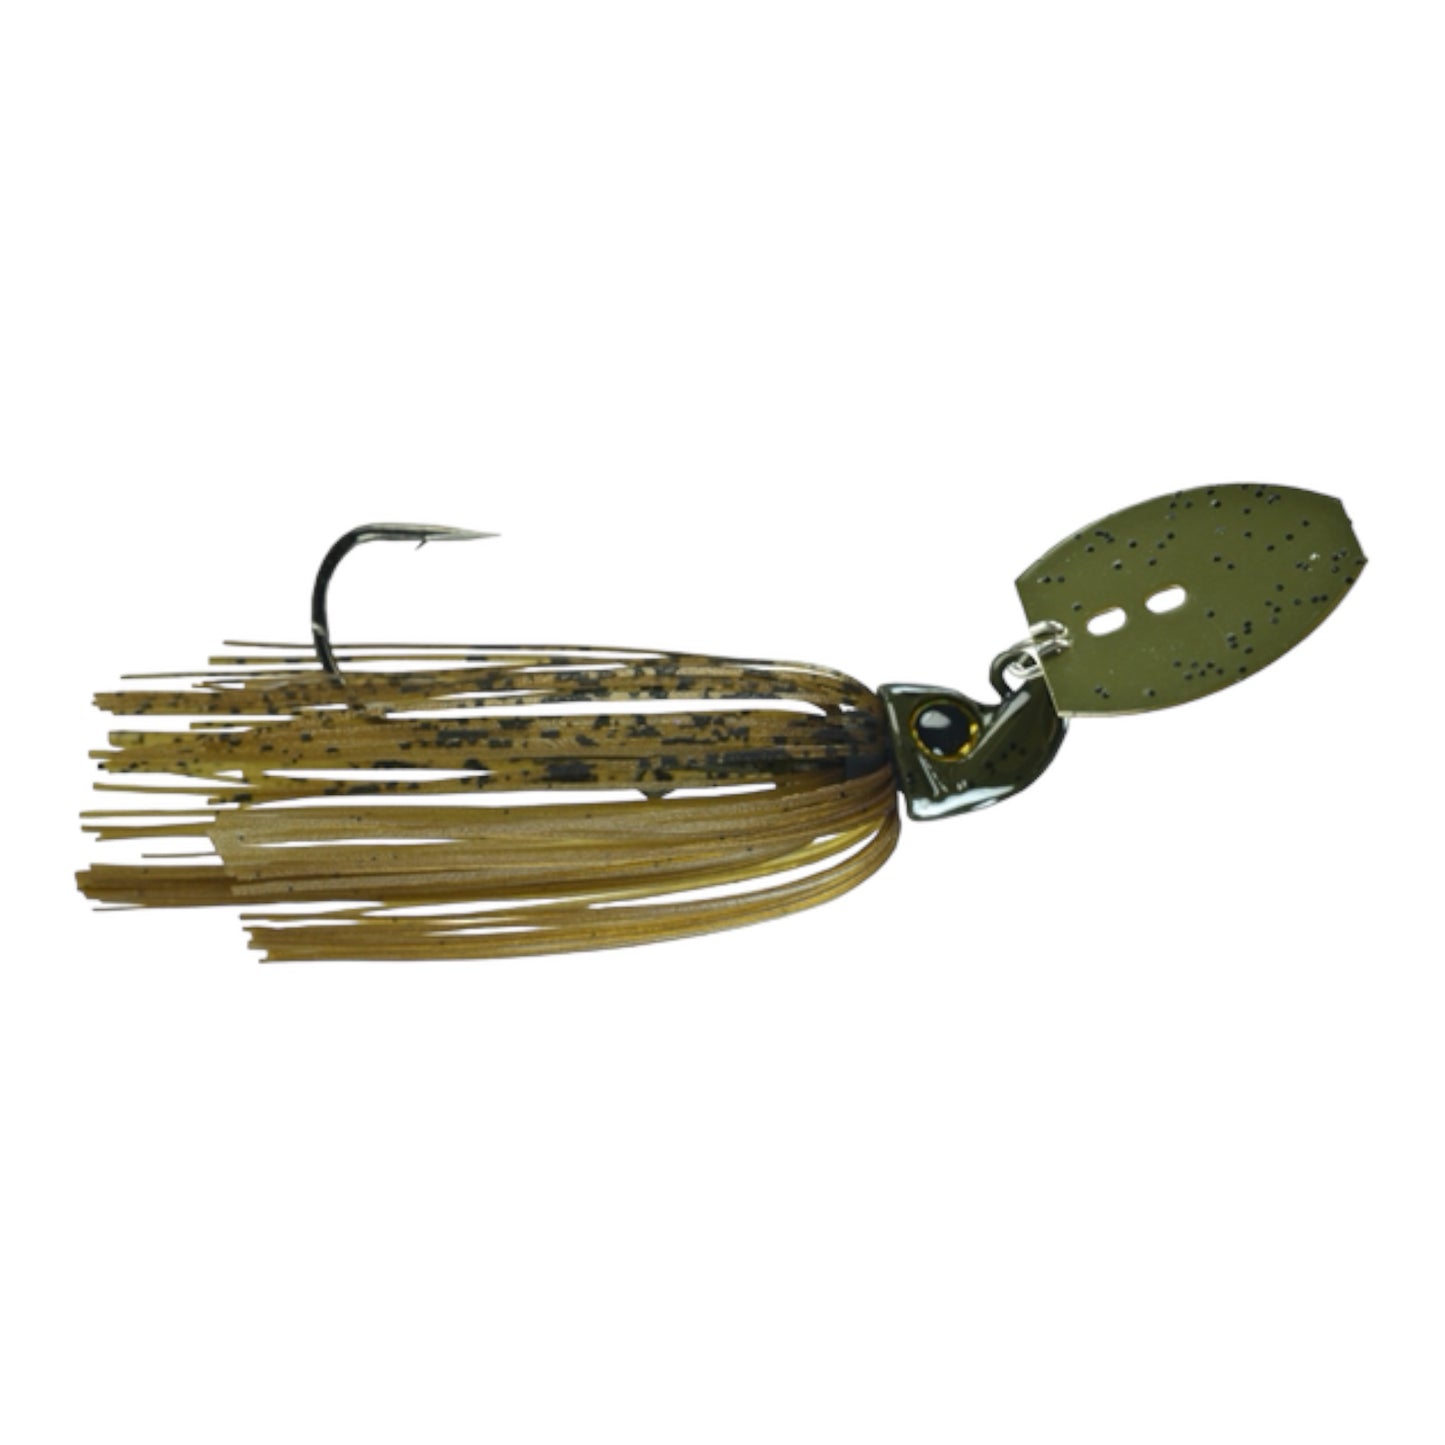 Picasso Lures Shock Blade Pro Vibrating Bladed Jig